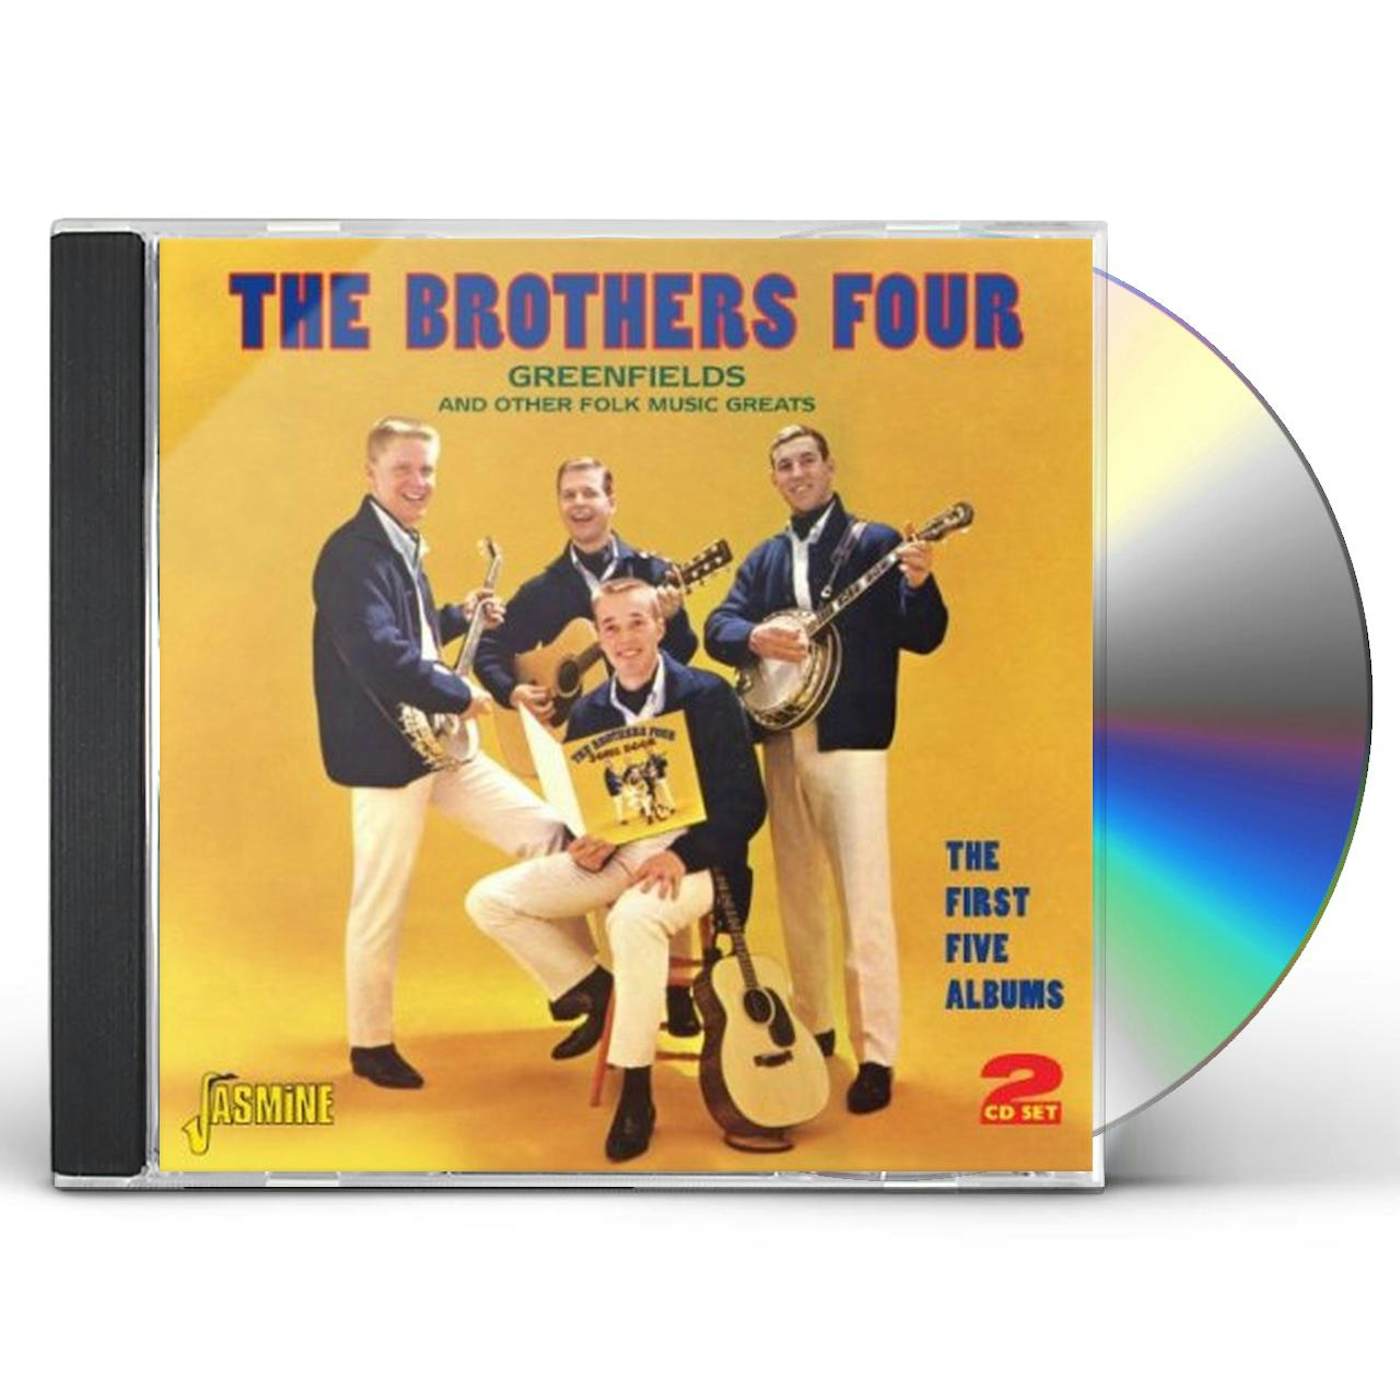 The Brothers Four GREENFIELDS & OTHER FOLK MUSIC GREATS CD